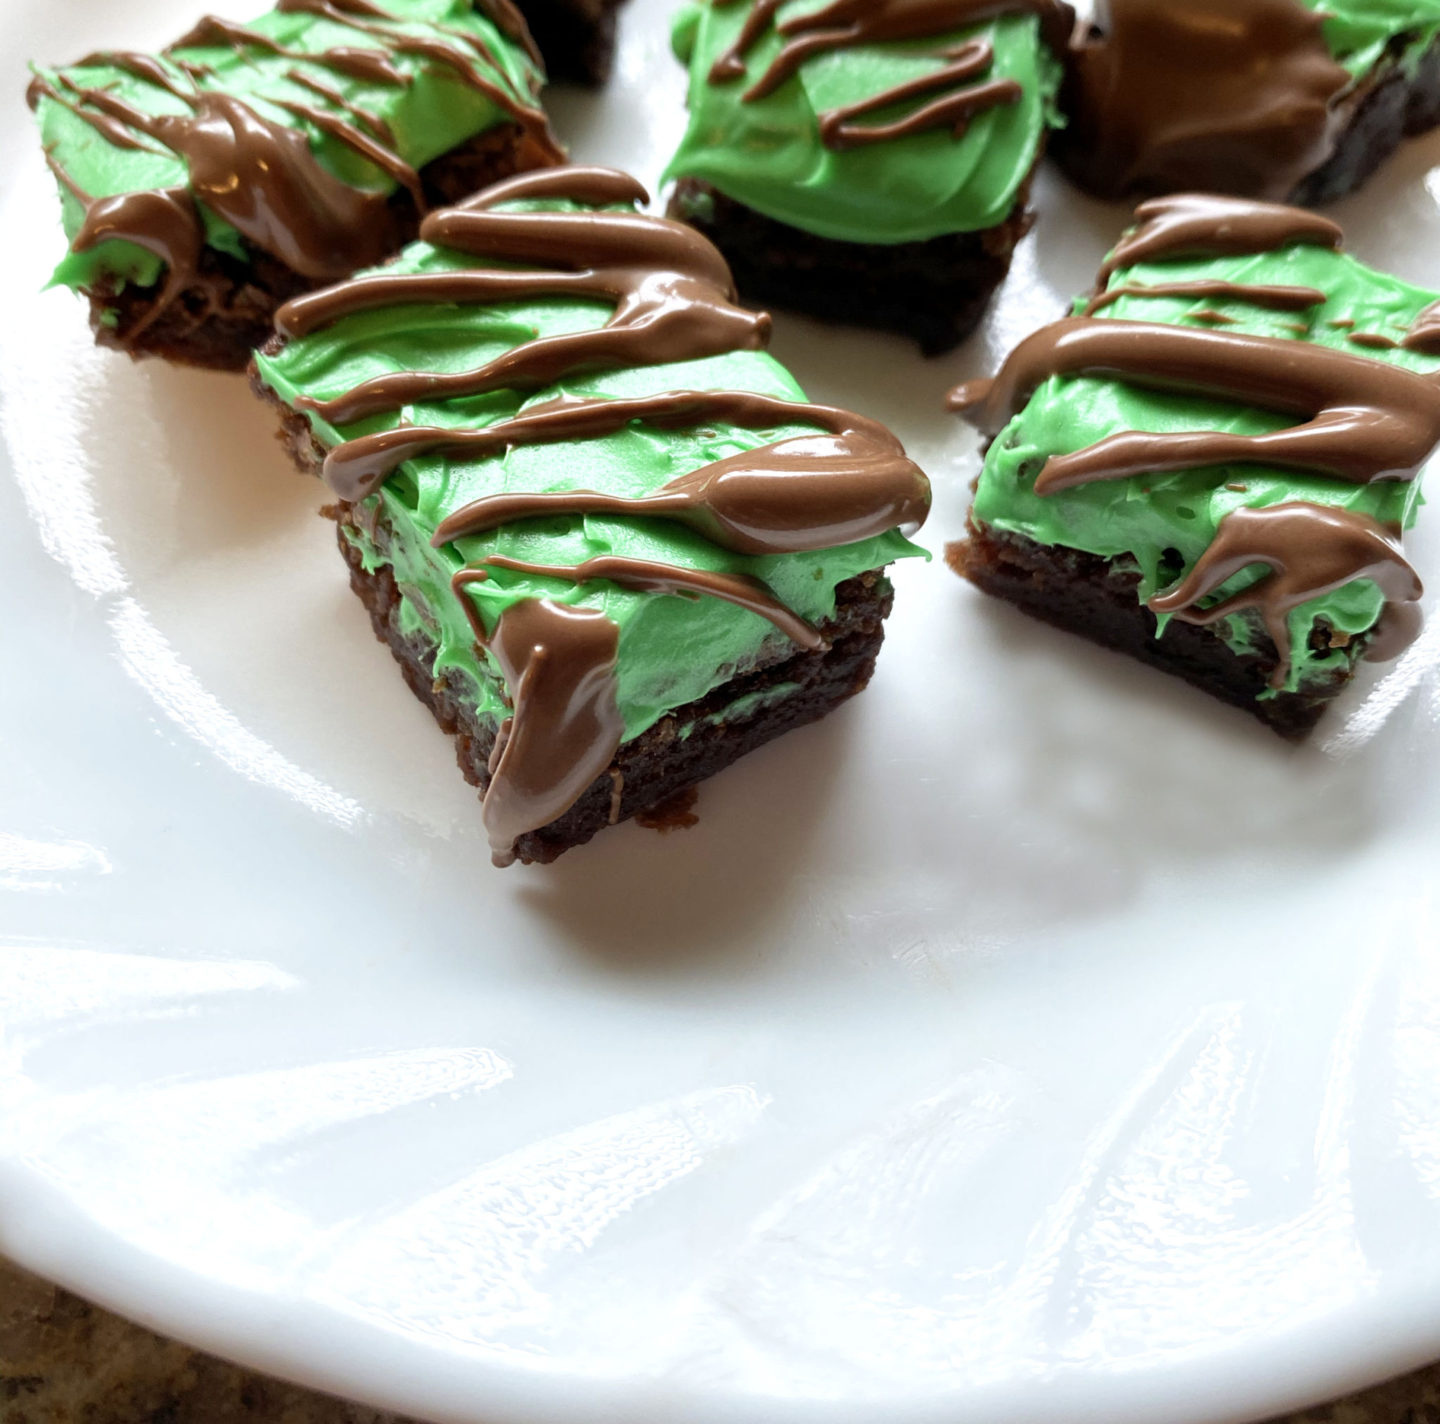 creme de menthe brownies with green frosting and chocolate drizzle